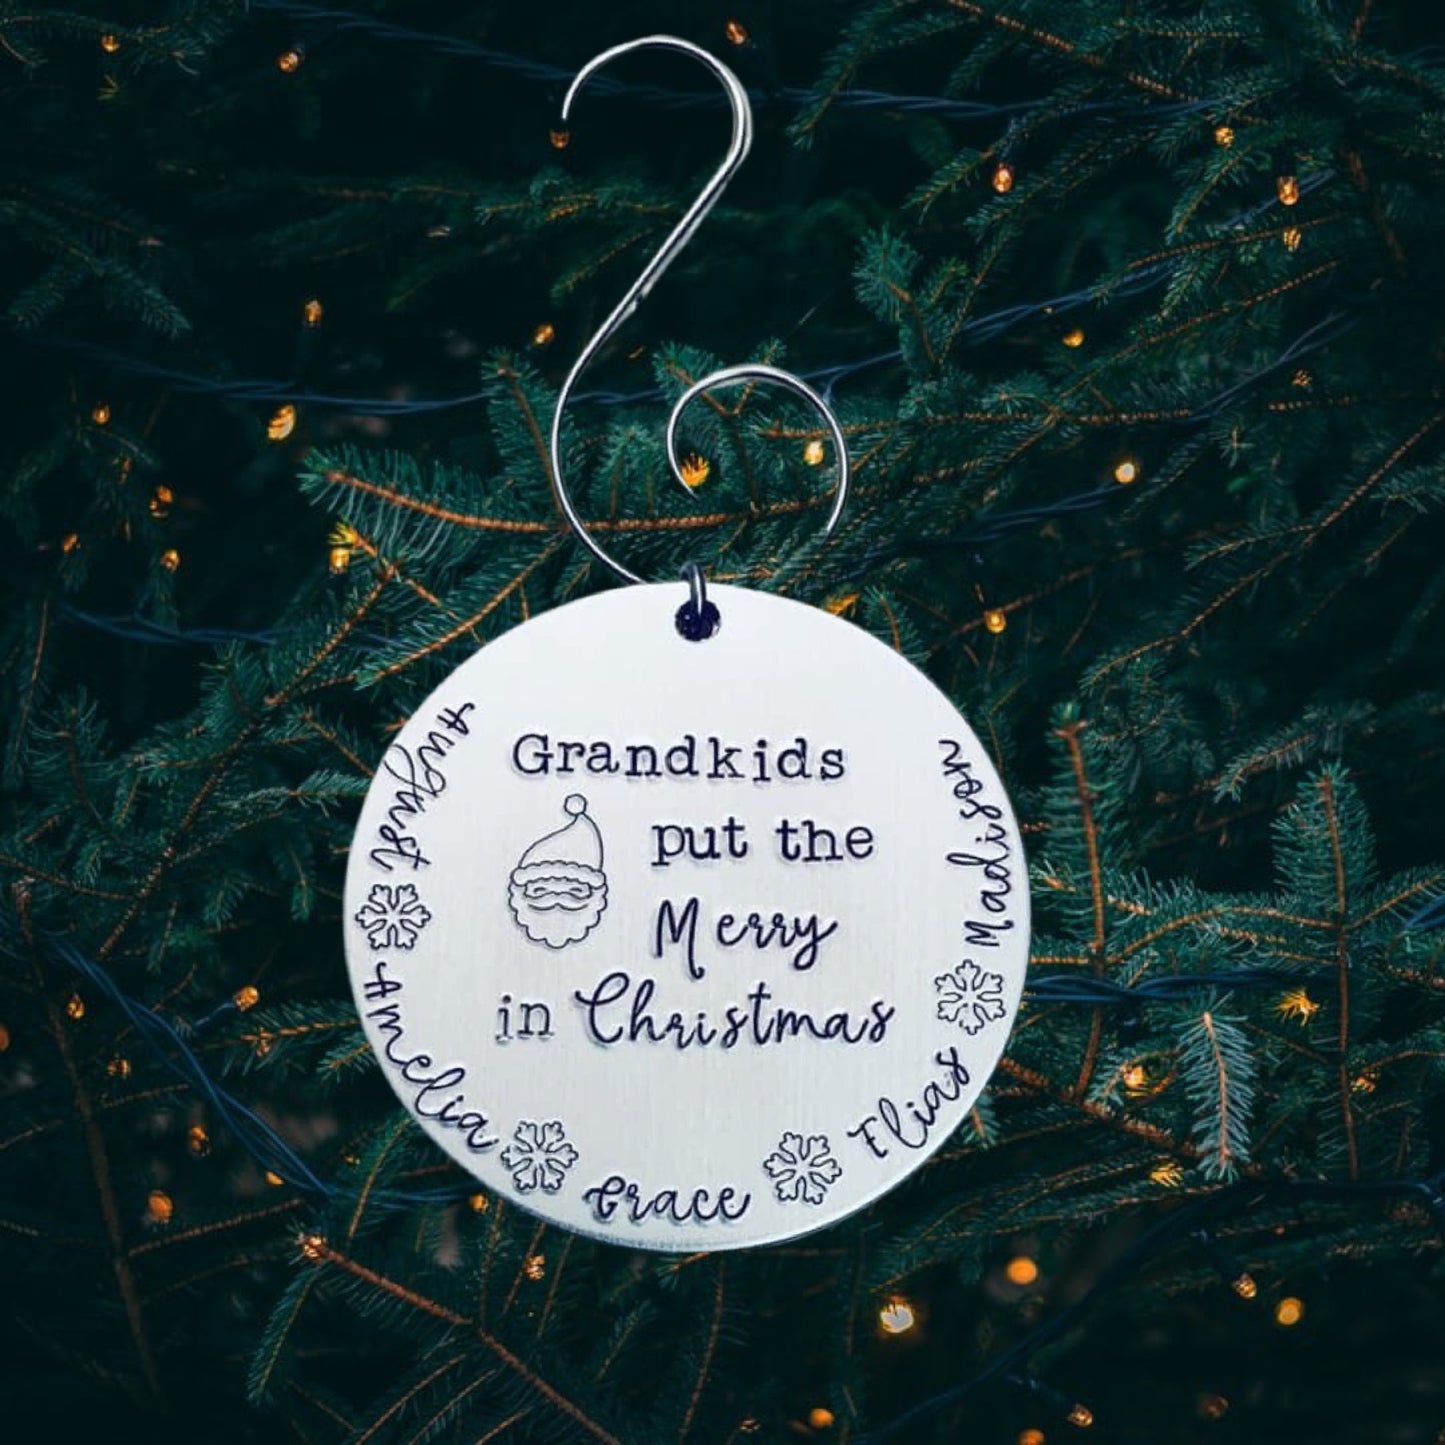 Grandkids put the merry in Christmas Ornament